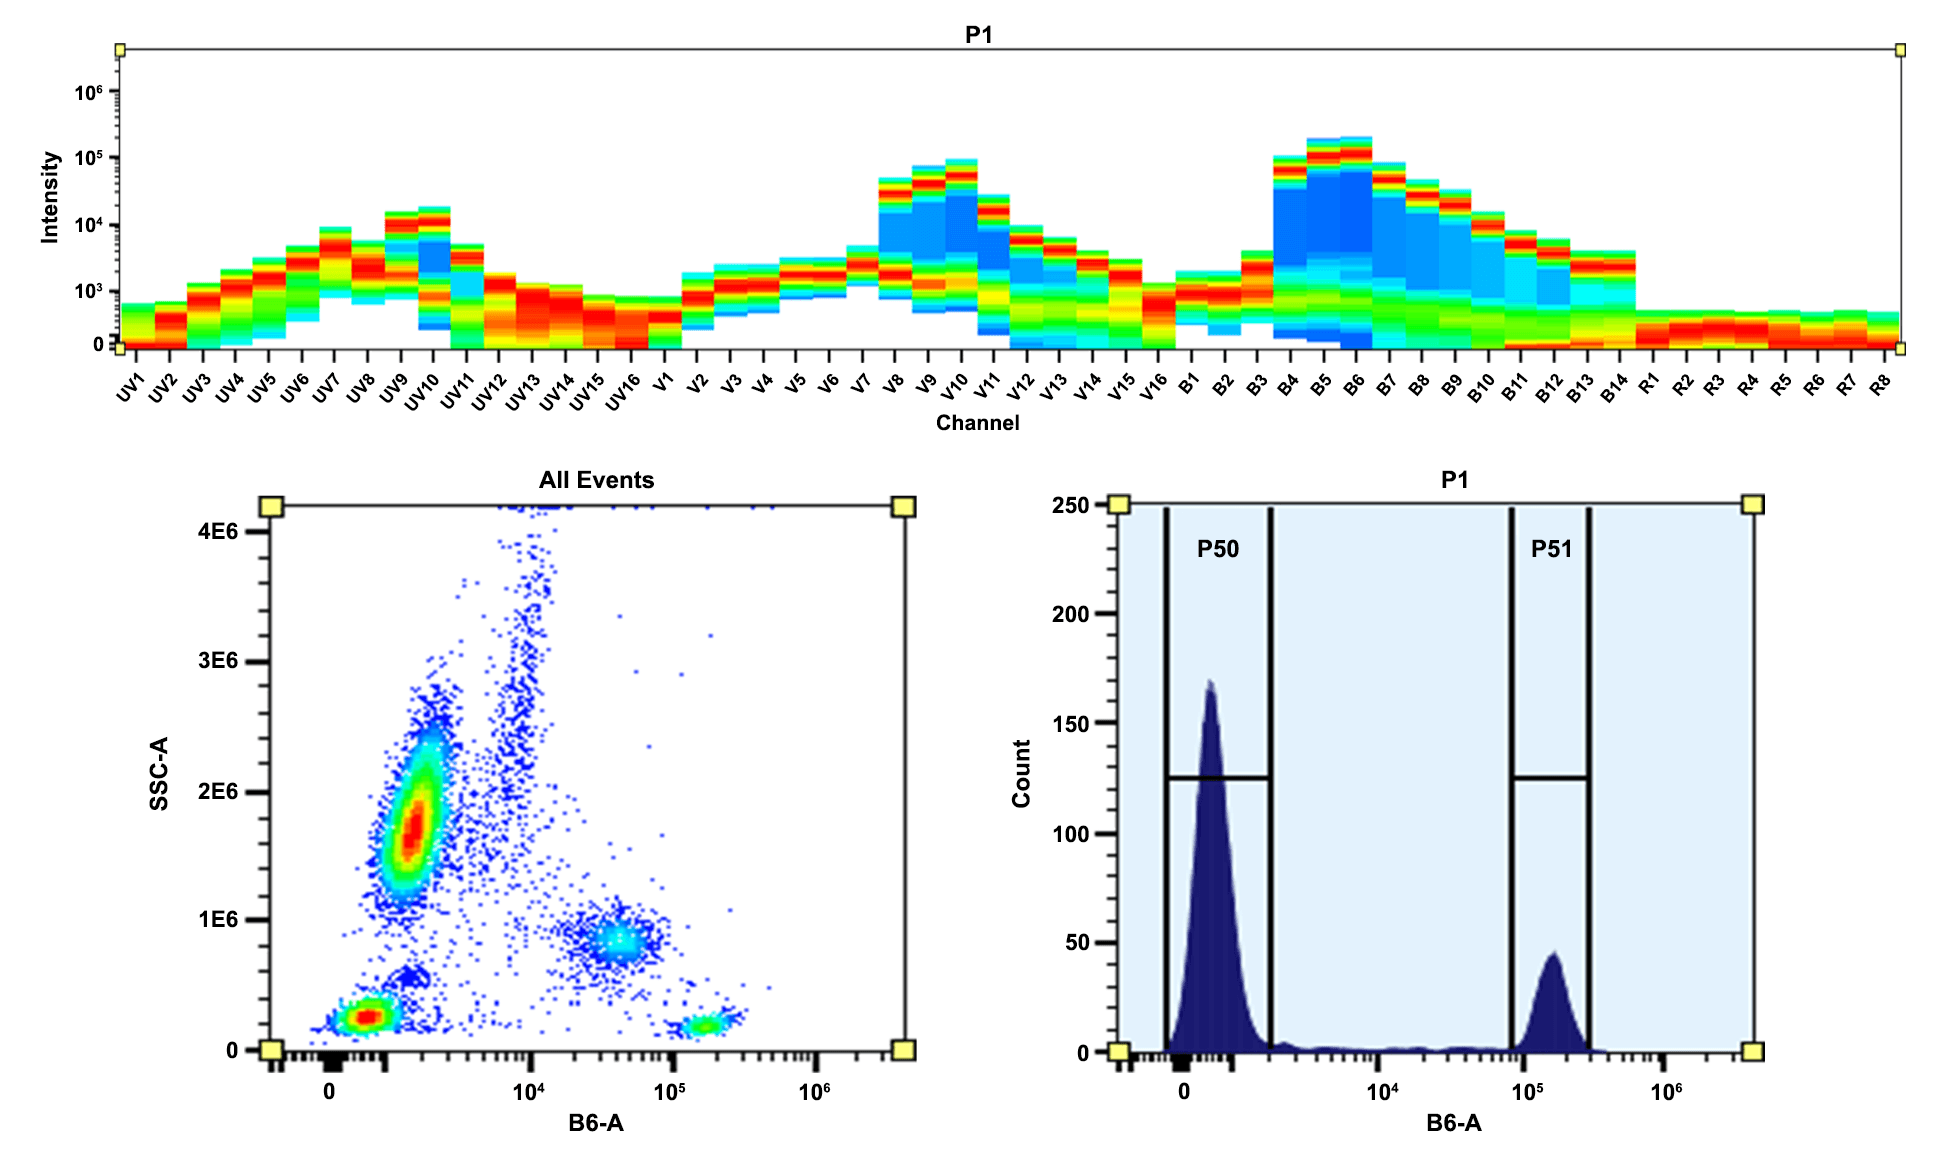 Top) Spectral pattern was generated using a 4-laser spectral cytometer. Spatially offset lasers (355 nm, 405 nm, 488 nm, and 640 nm) were used to create four distinct emission profiles, then, when combined, yielded the overall spectral signature. Bottom) Flow cytometry analysis of whole blood stained with PE/iFlour® 594 anti-human CD4 *SK3* conjugate. The fluorescence signal was monitored using an Aurora flow cytometer in the PE/iFluor® 594 specific B6-A channel.